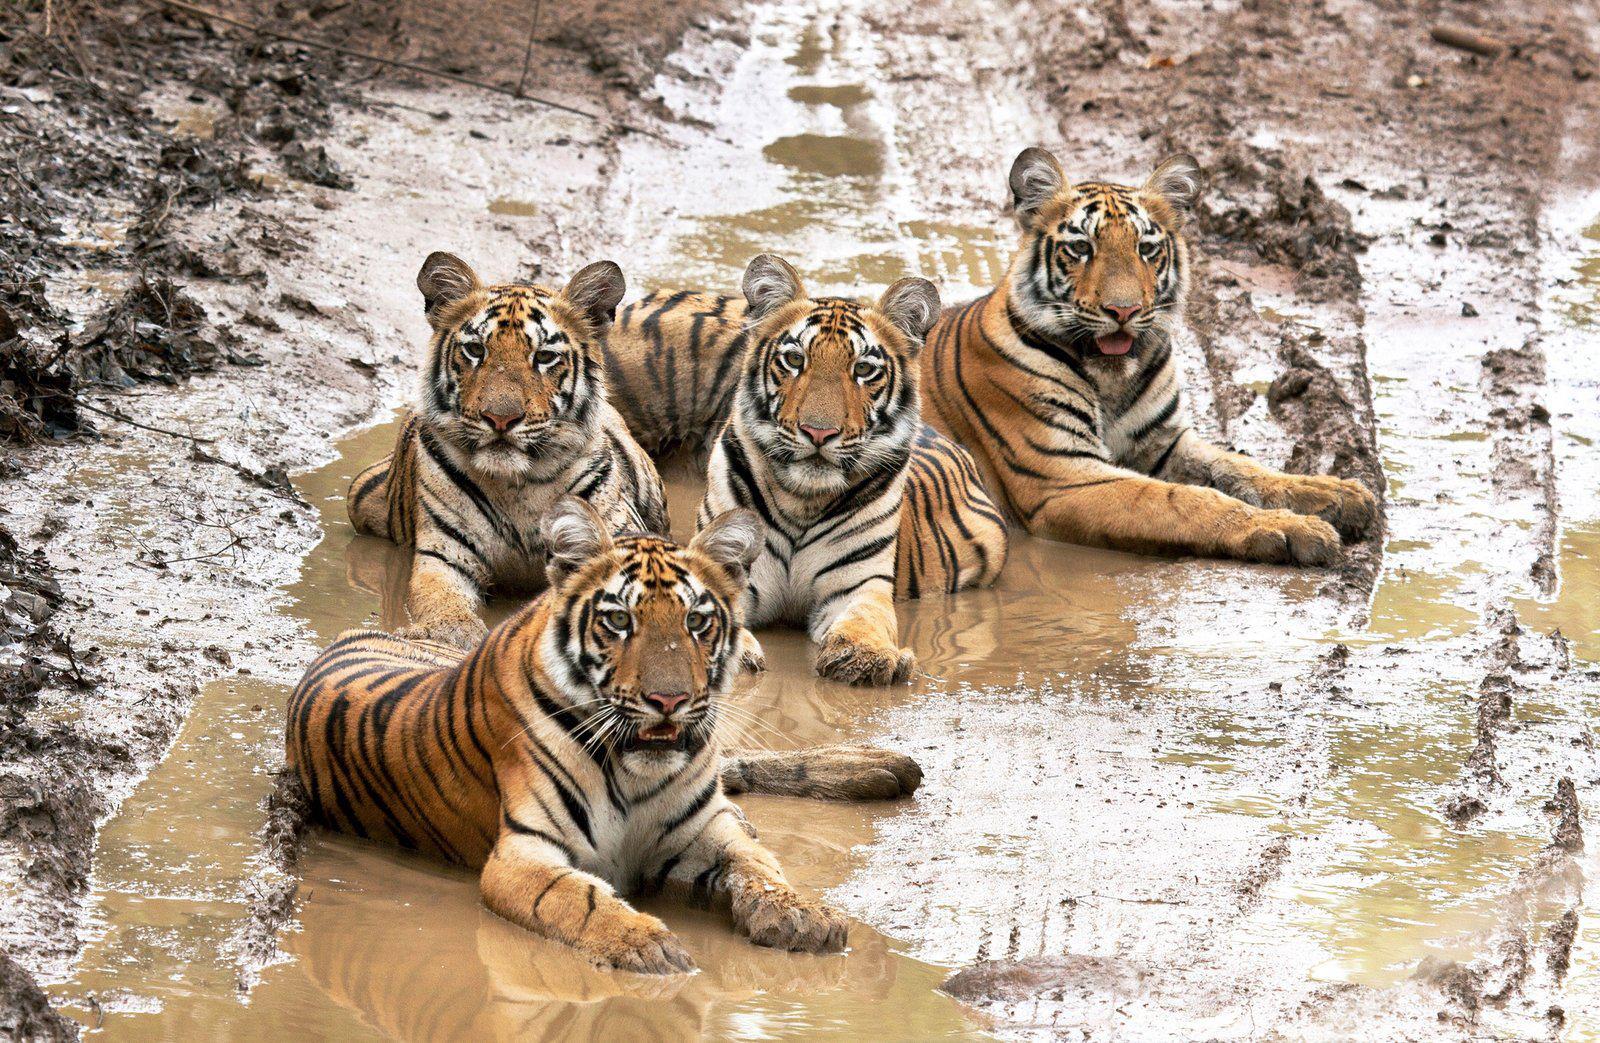 View joke - Even in the mud tigers stay elegant